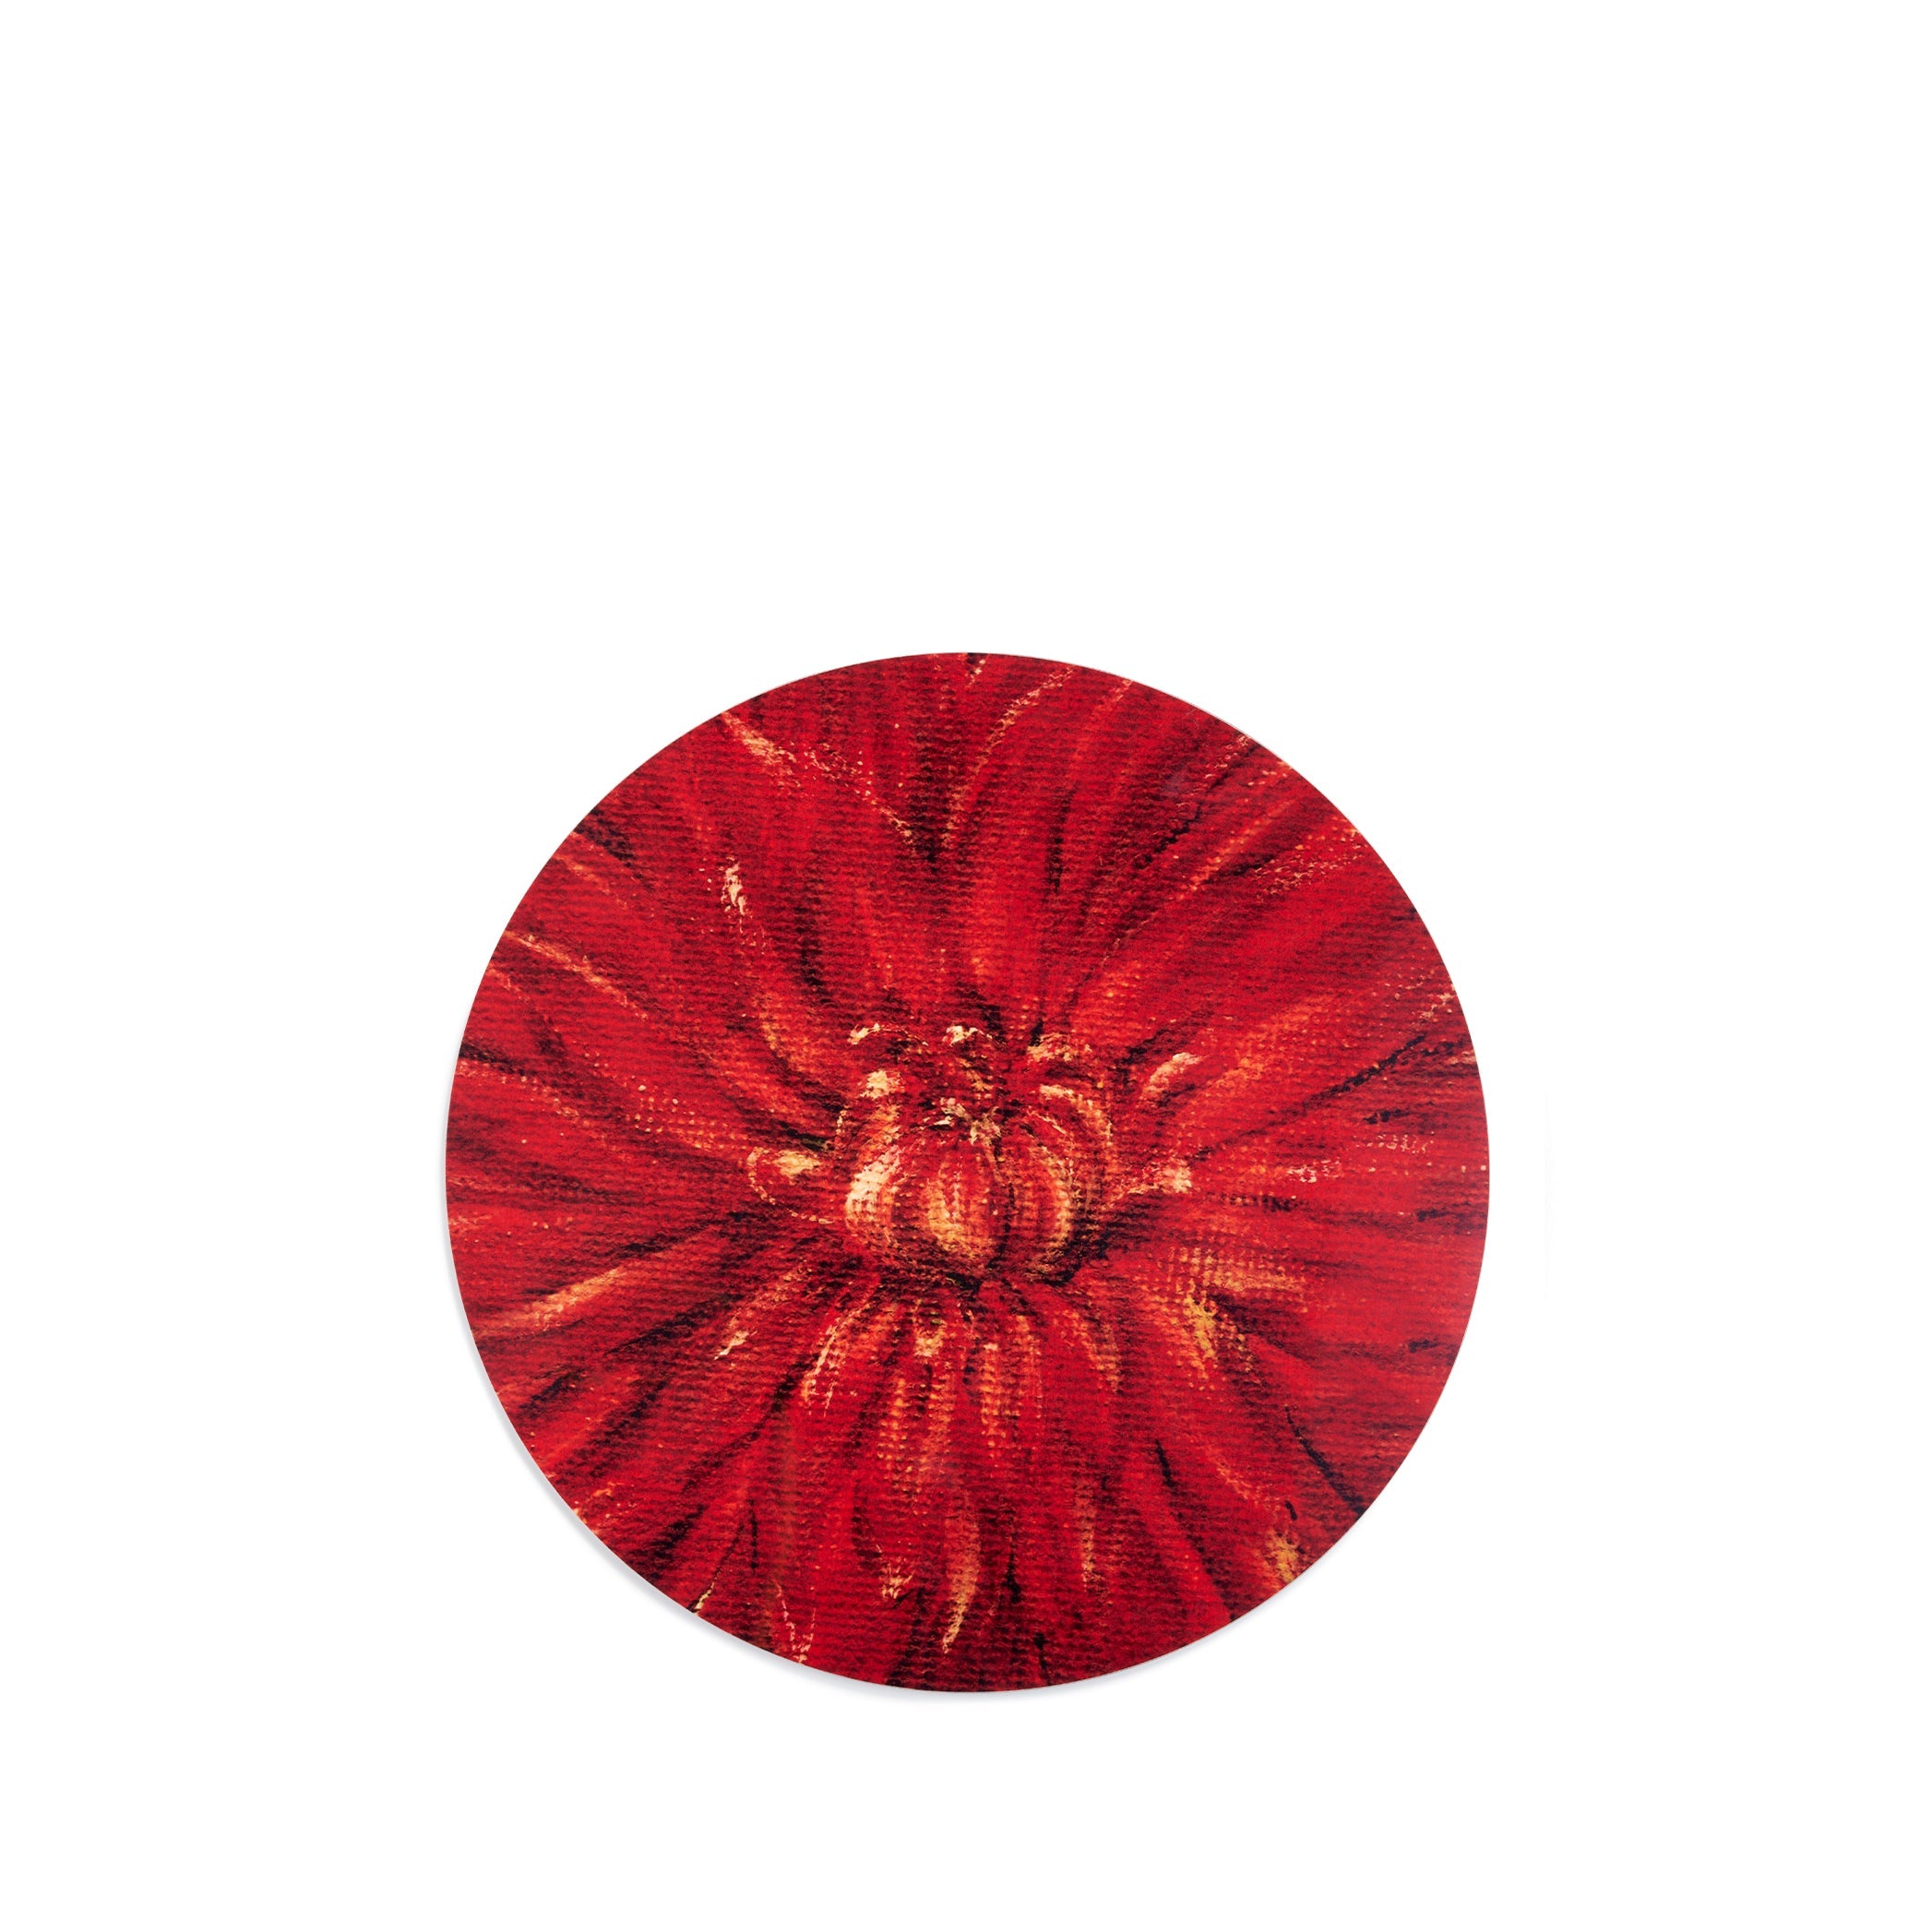 Dahlia 'Autumn Splendor' Round Cork-Backed Placemat in Rust Red